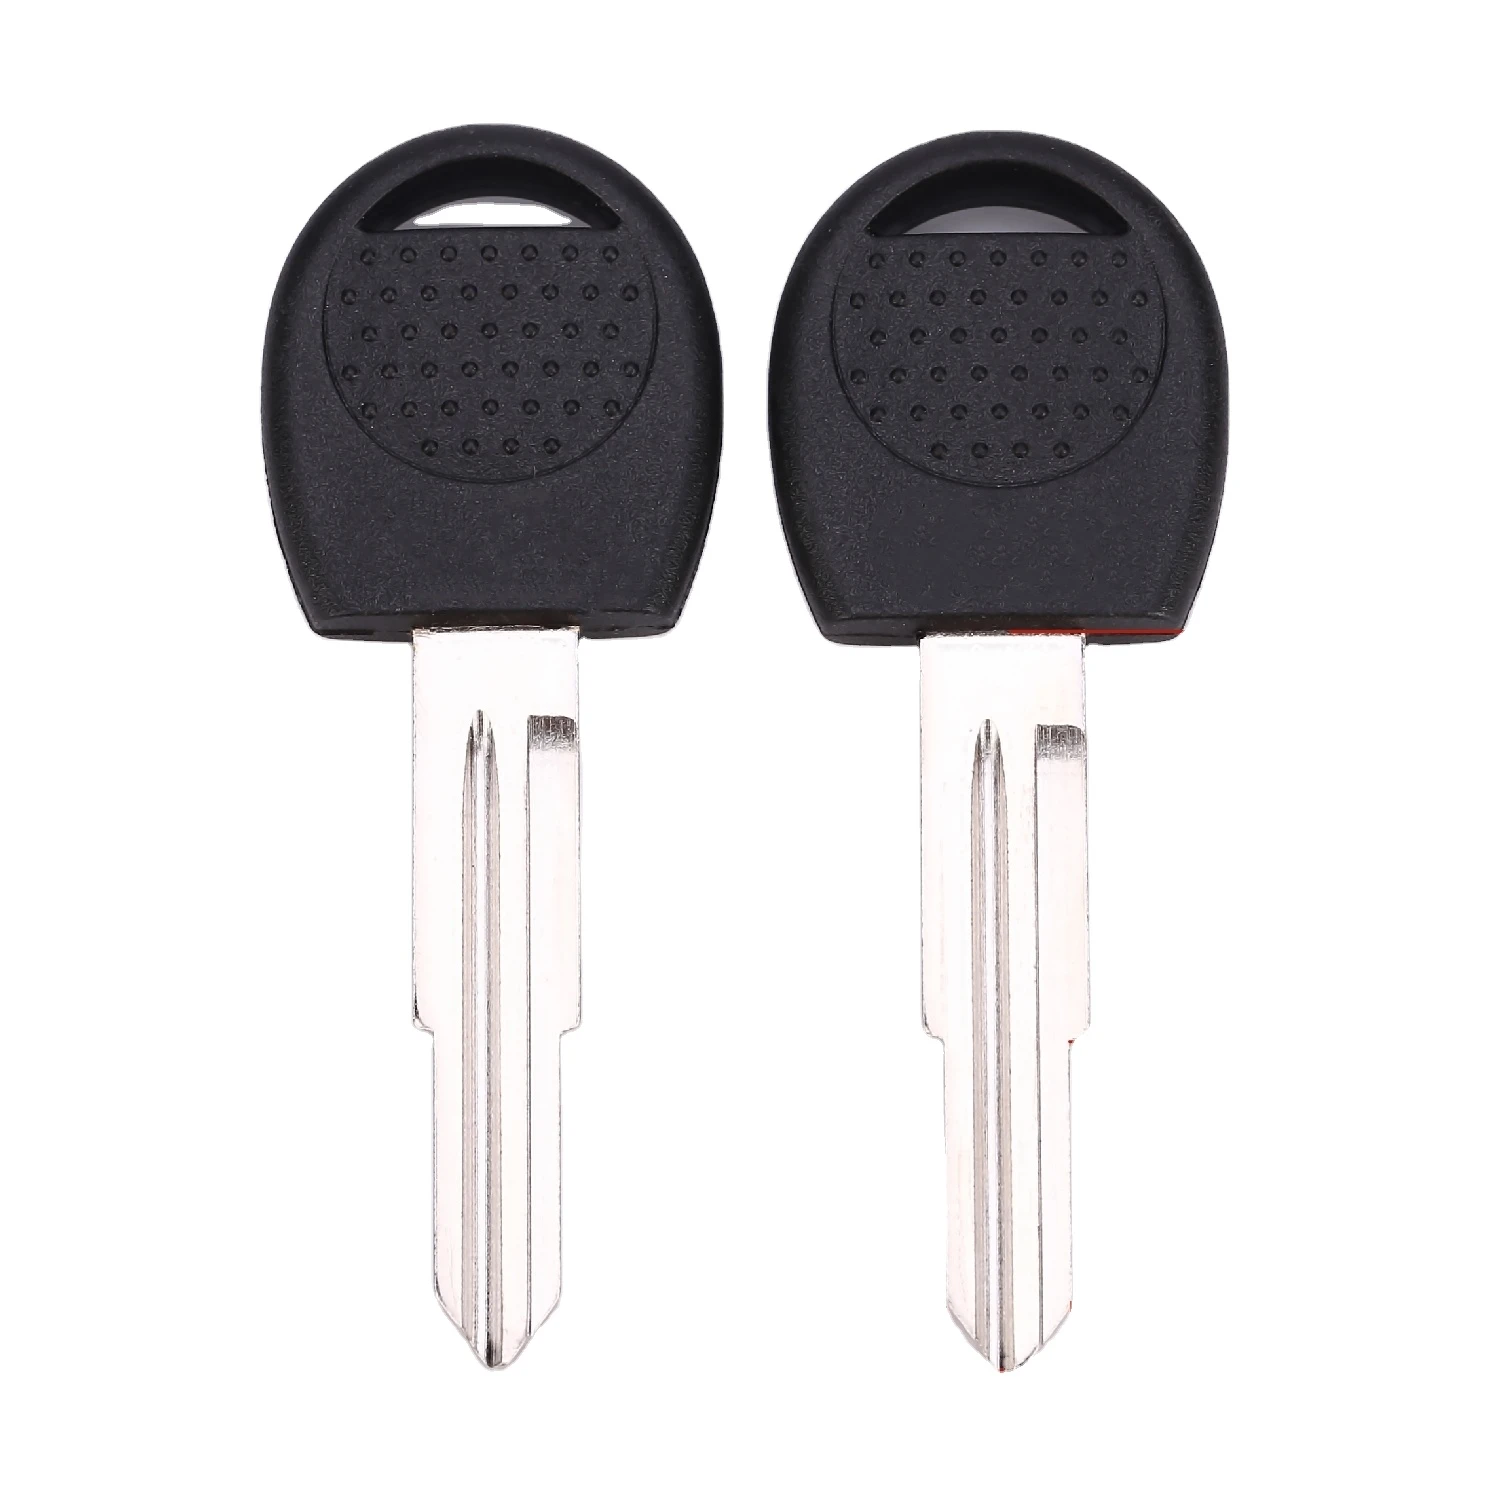 Car key with black handle Key for ordinary cars Excellent car key